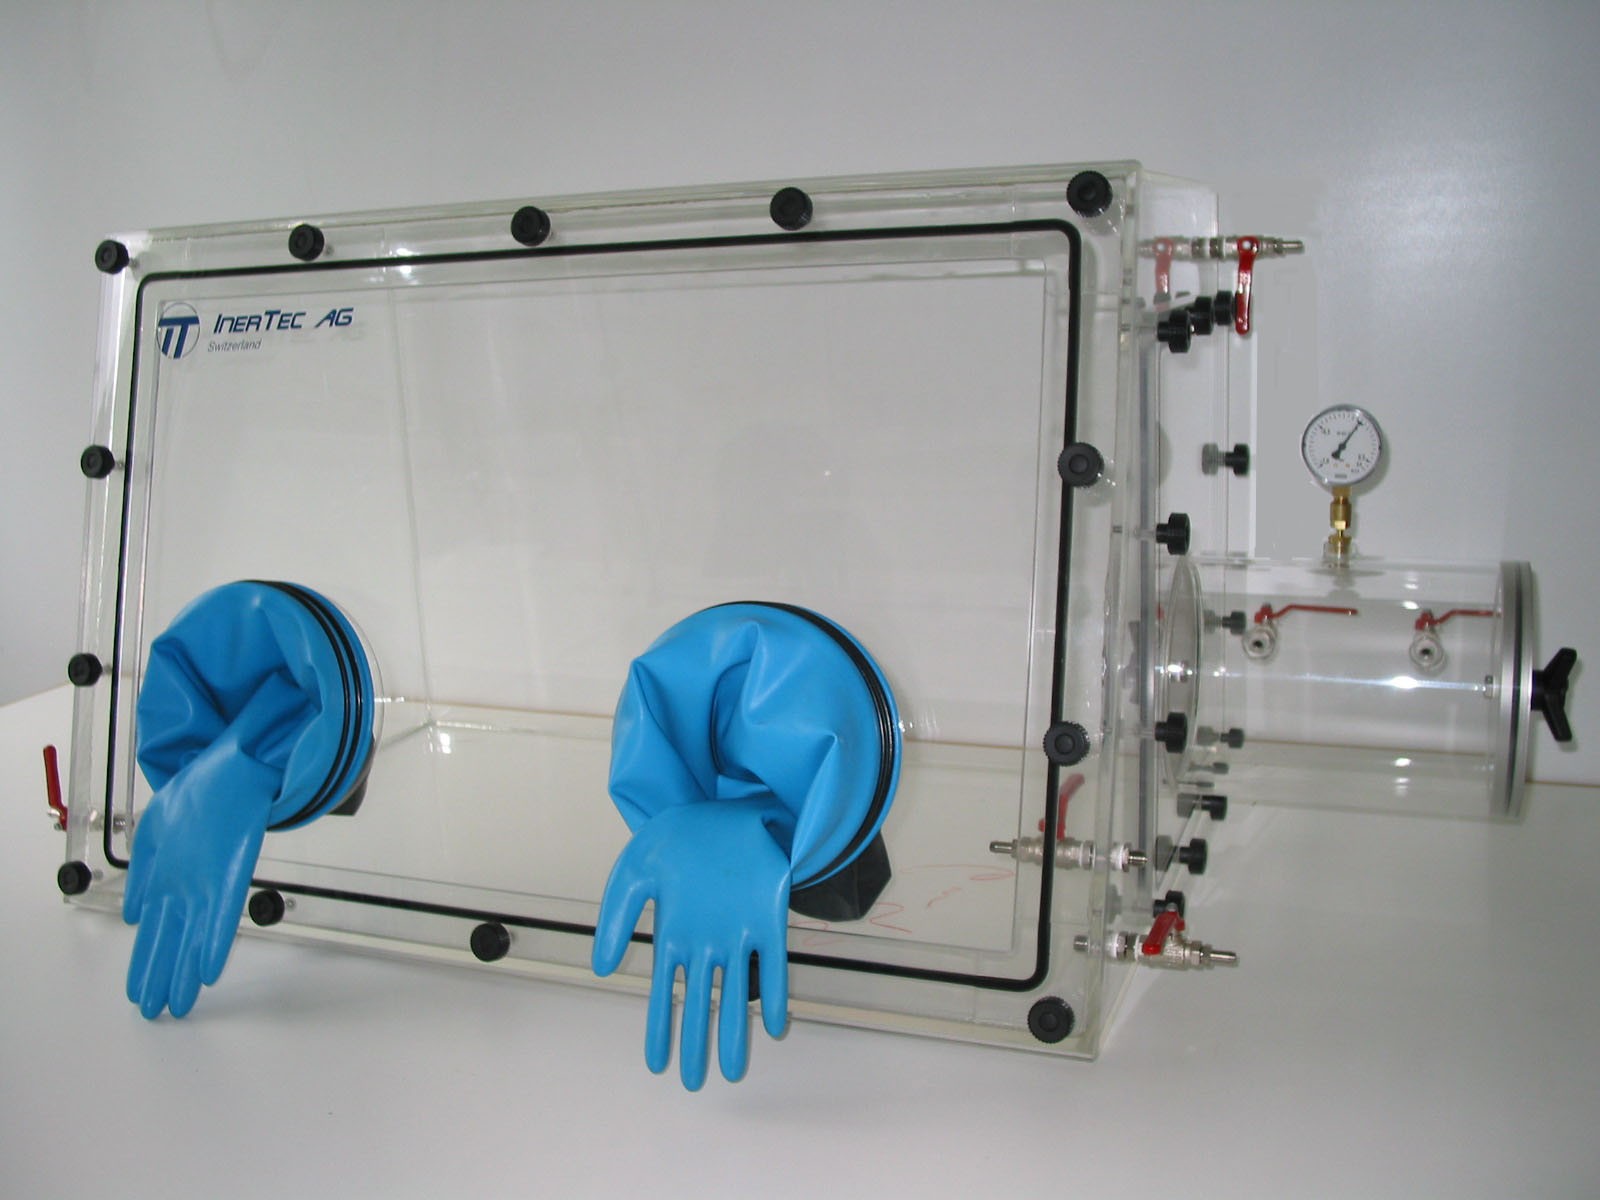 Glovebox made of acrylic&gt; Gas filling: automatic flushing with pressure control, front version: removable, side version: flange, removable, control: humidity regulator and oxygen display with data logger